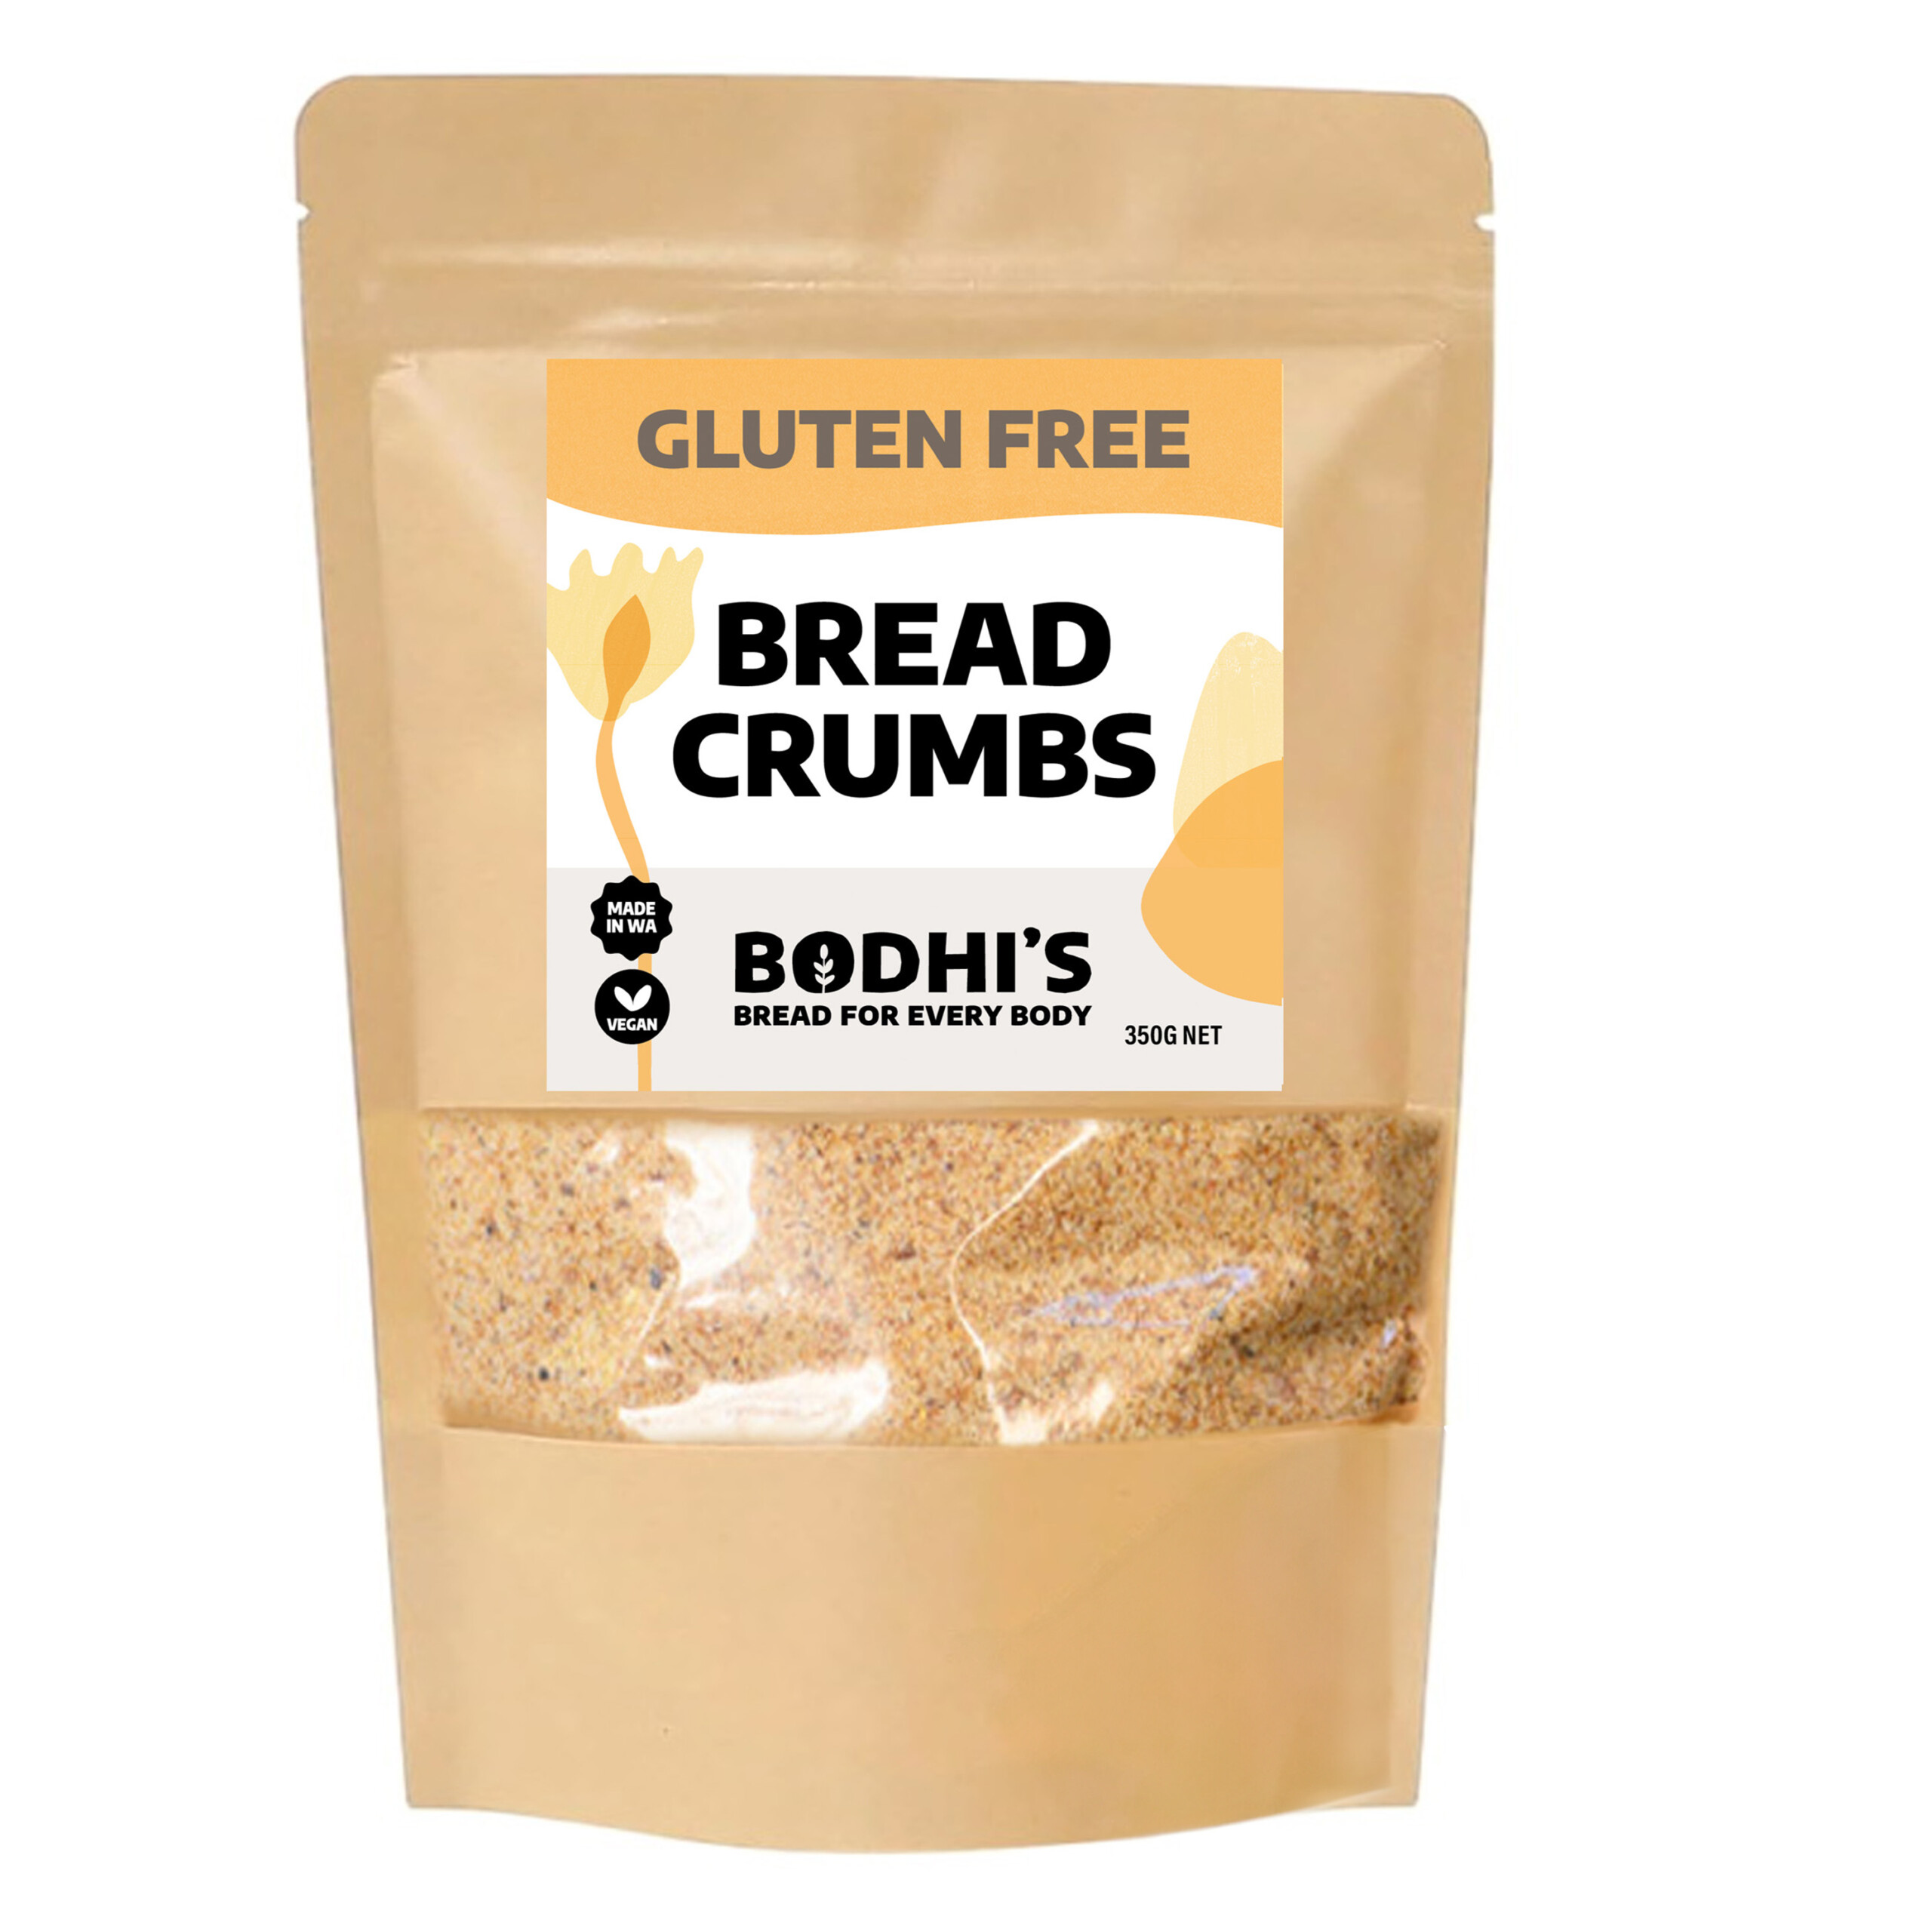 A photo of a pouch of Bodhi's Gluten Free breadcrumbs